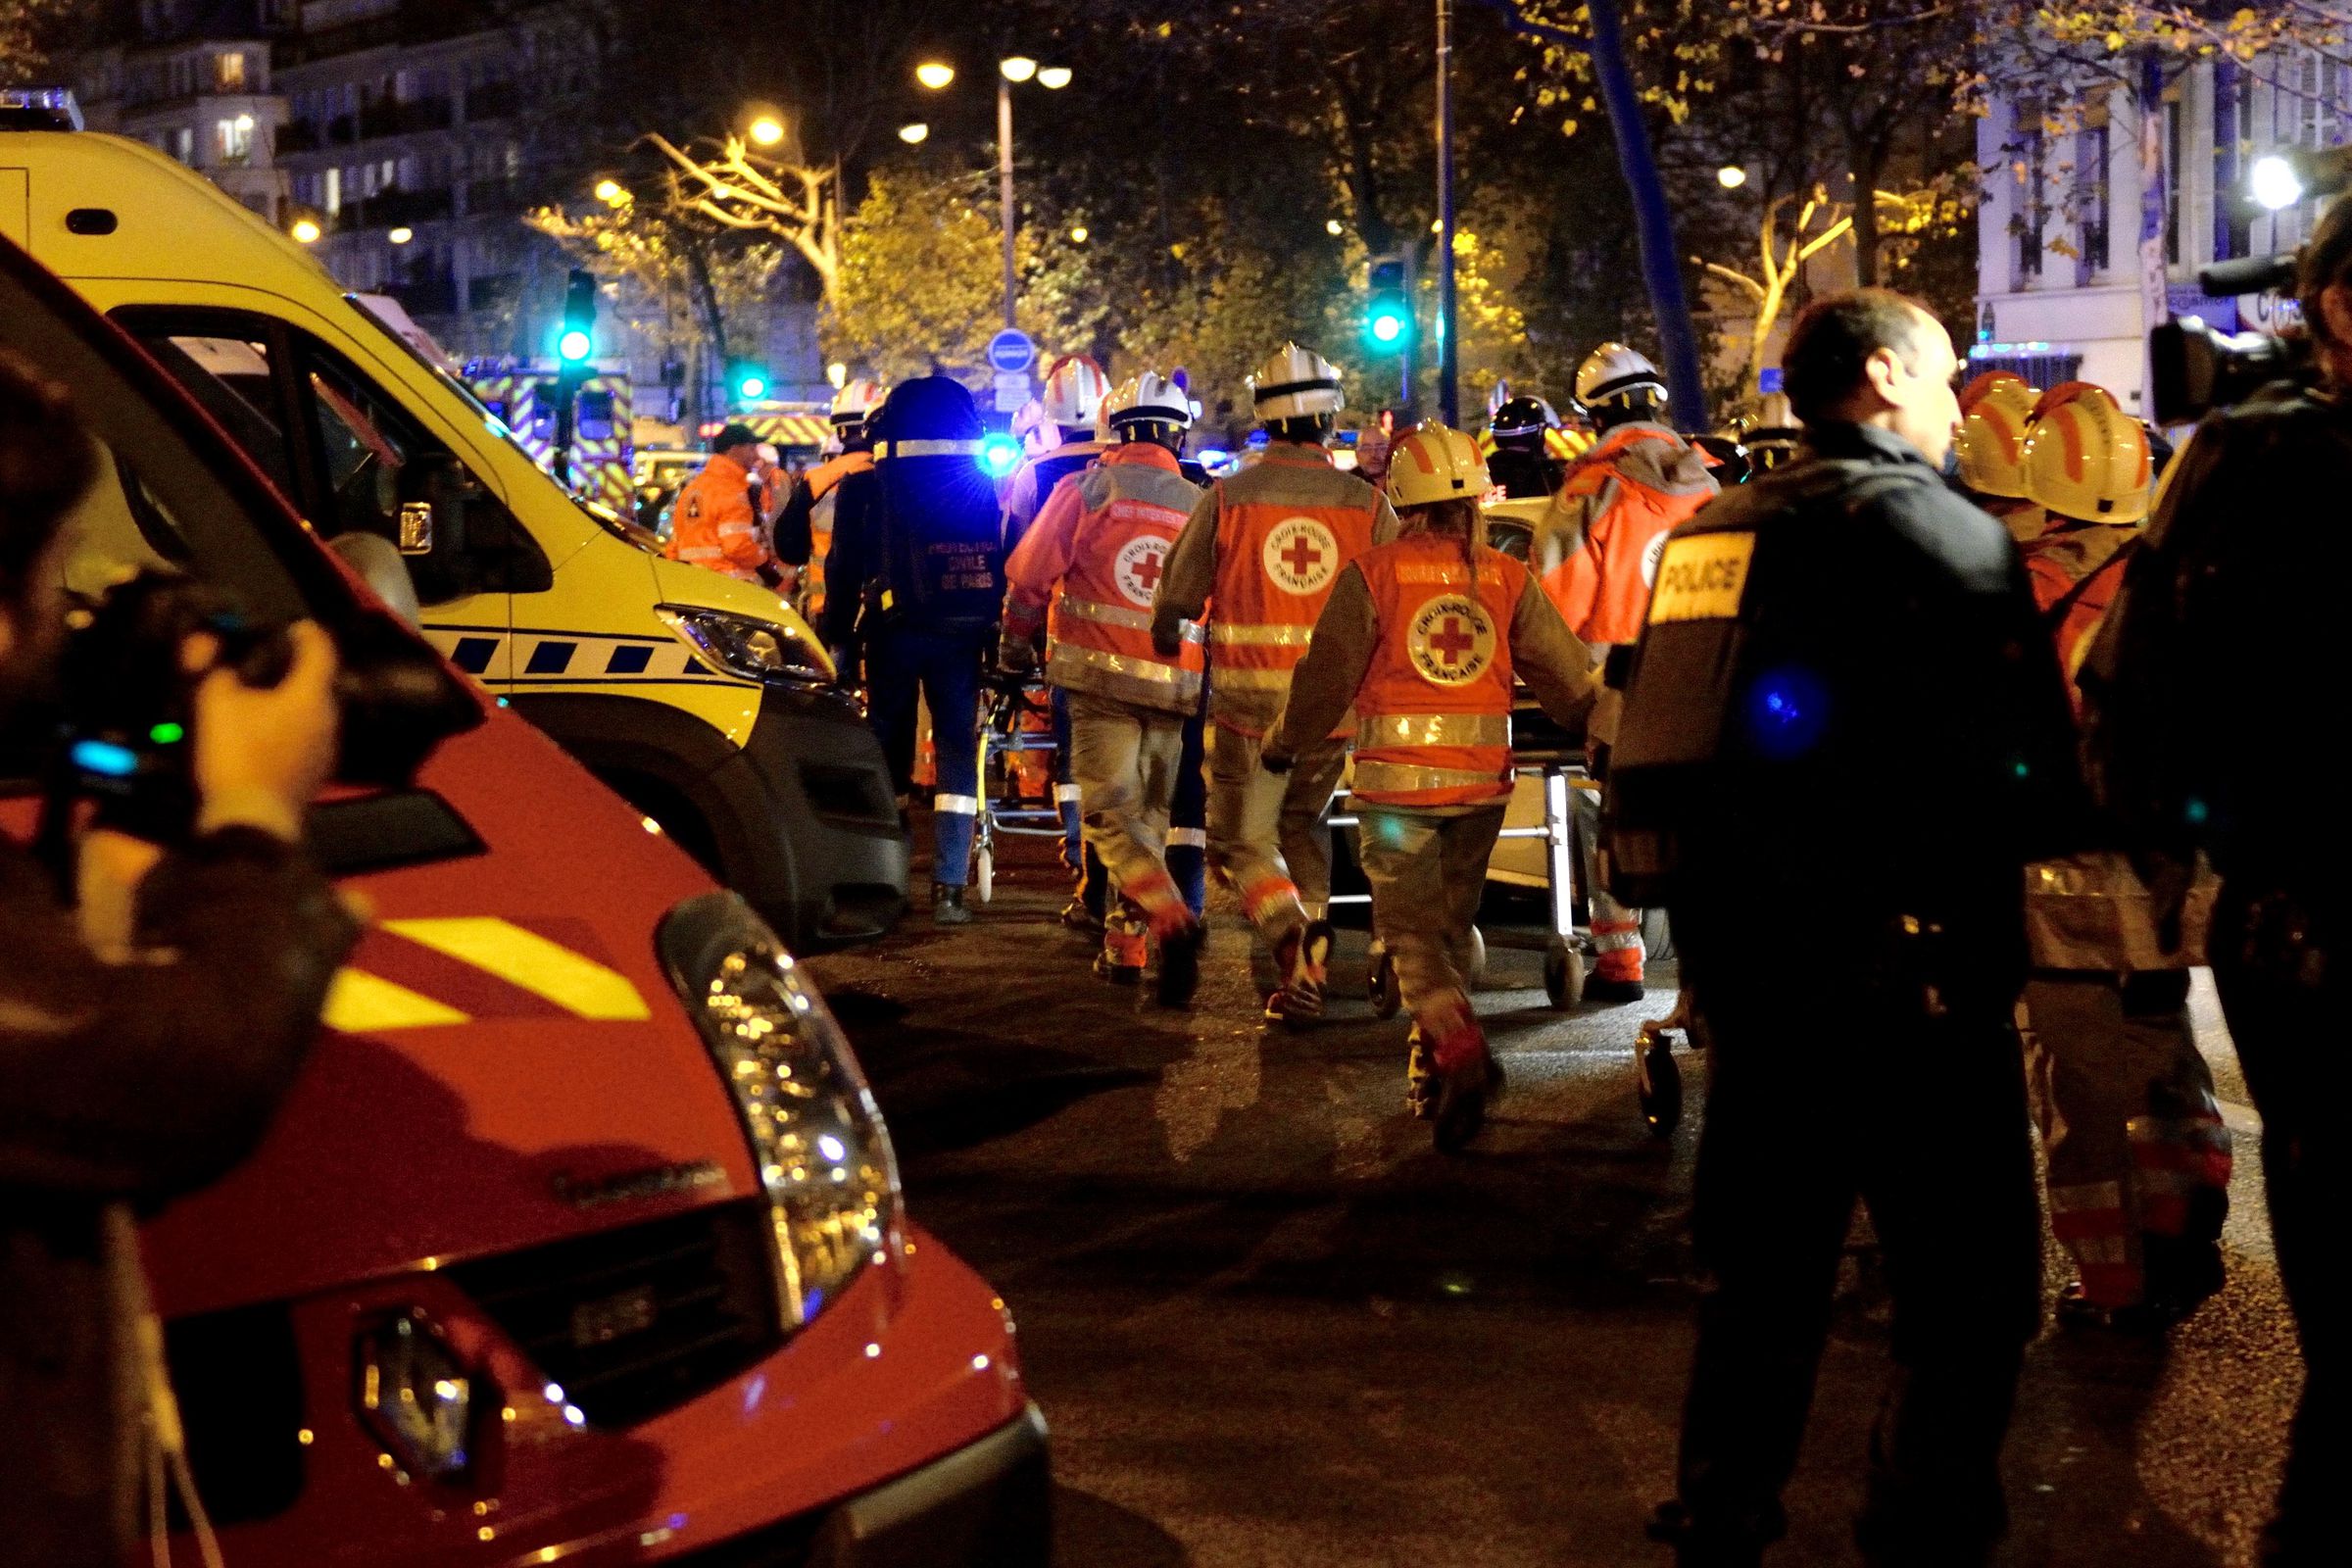 Rescue workers enter a triage area near Bataclan.